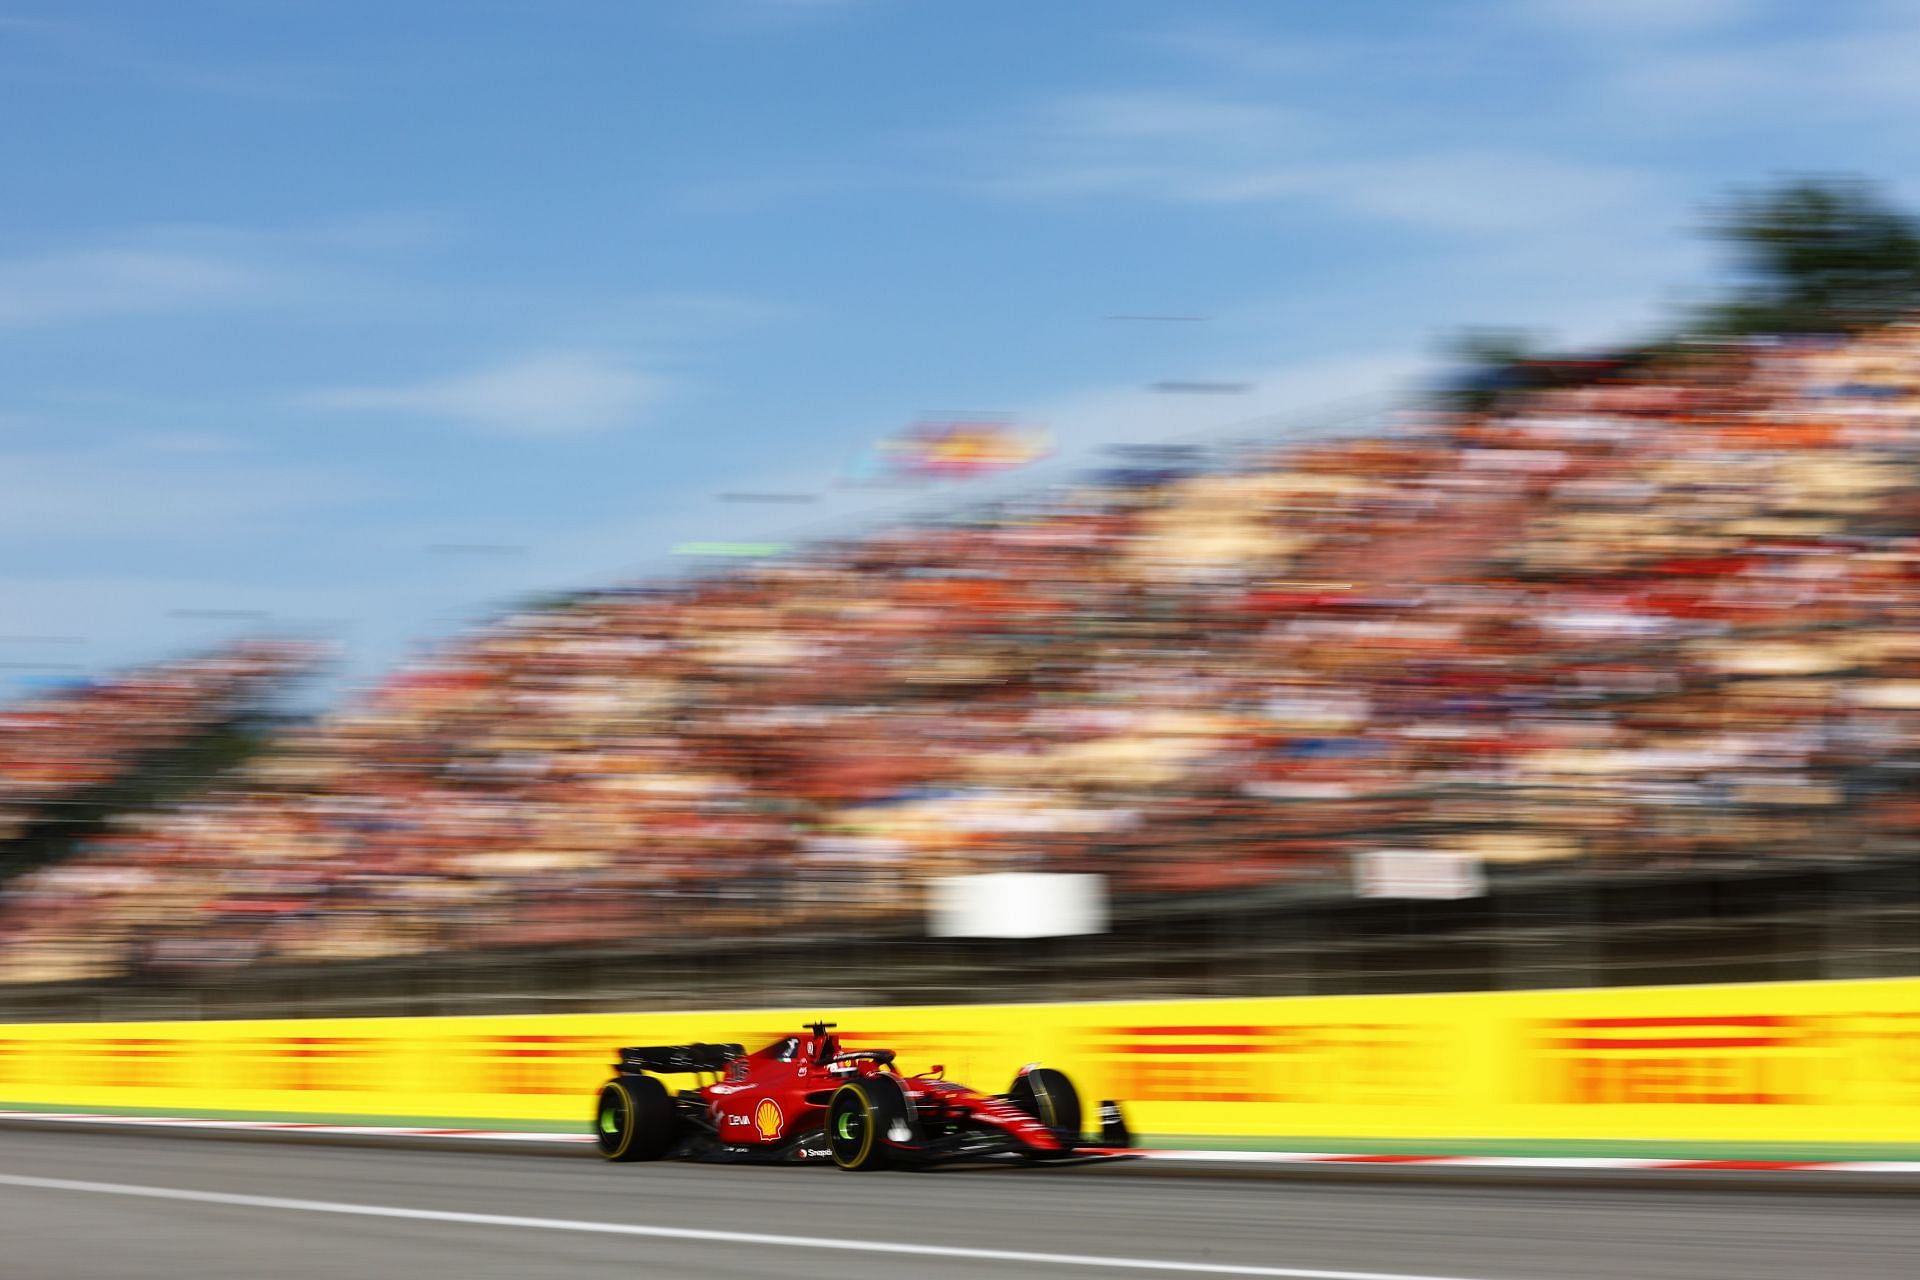 Ferrari appeared to be very fast around the Spanish GP track